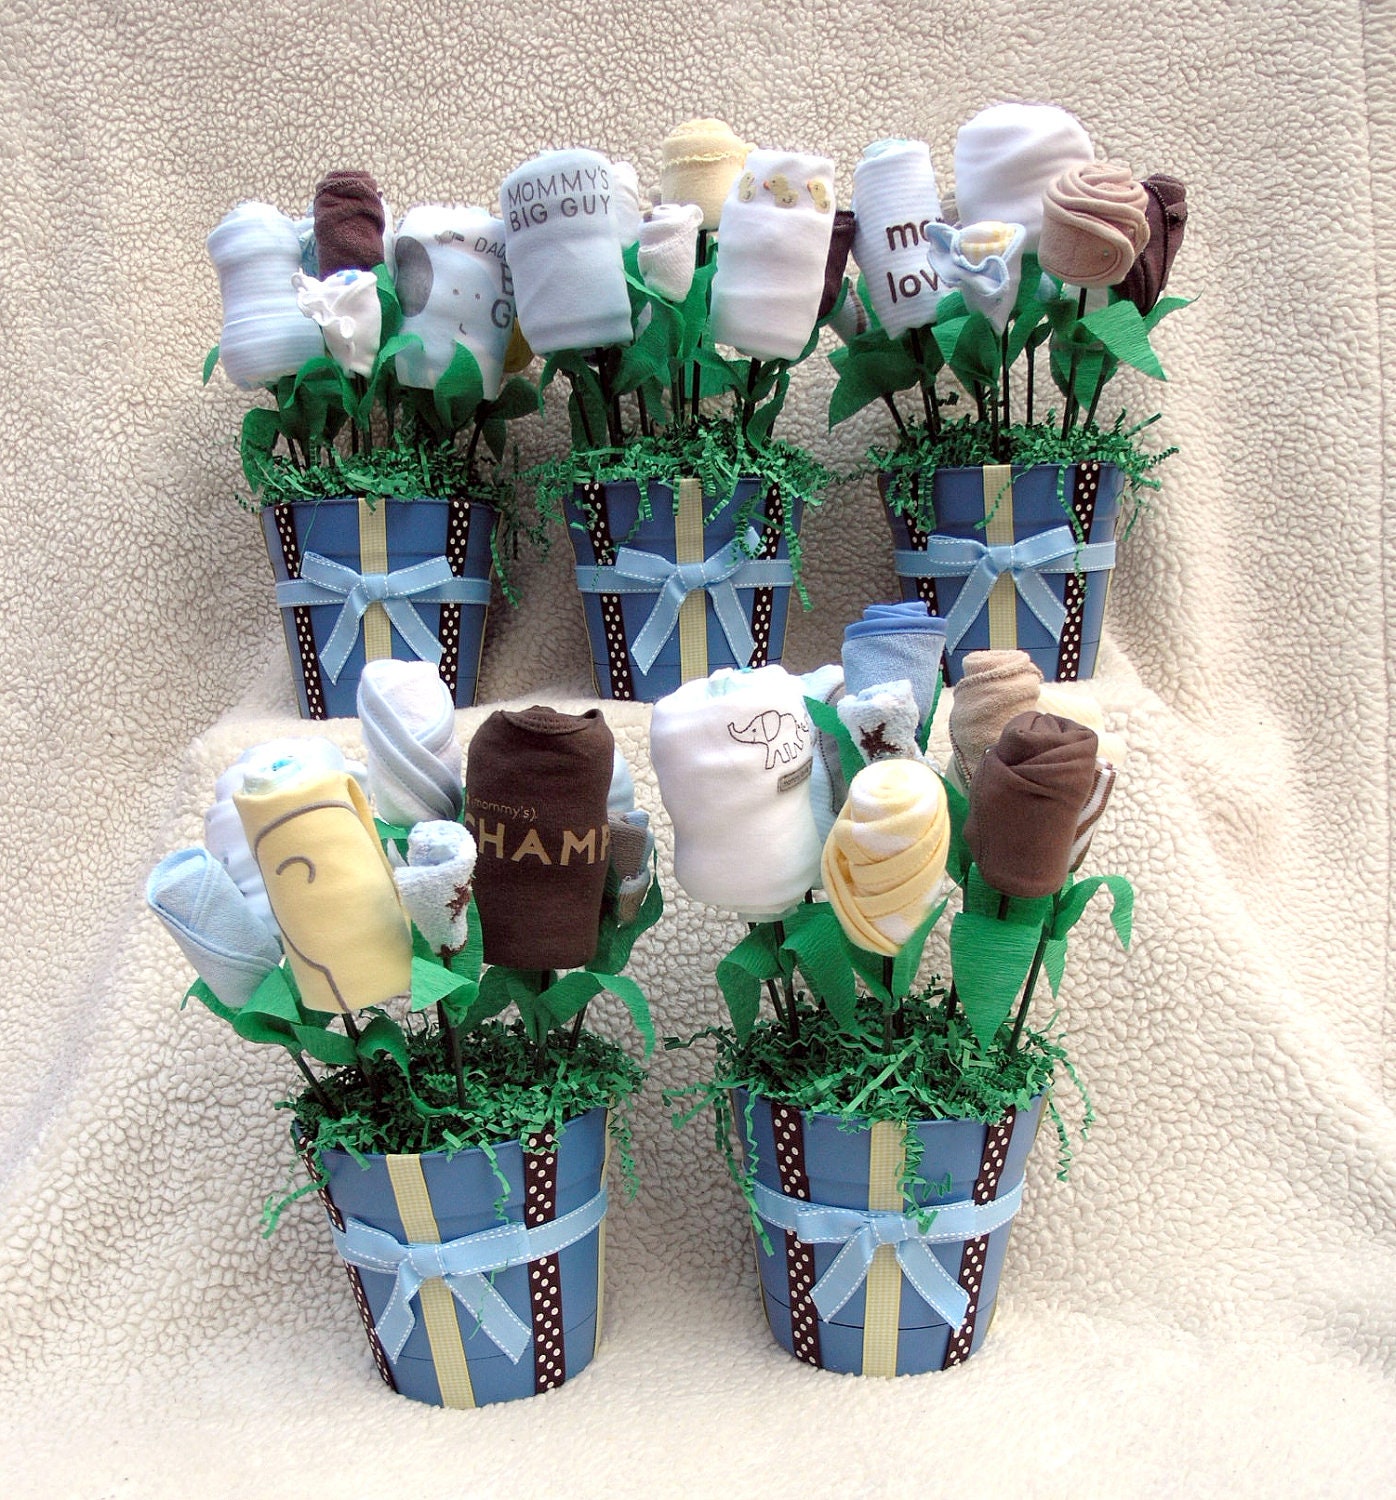 5 Baby Shower Decorations For a Baby Boy Shower by babyblossomco